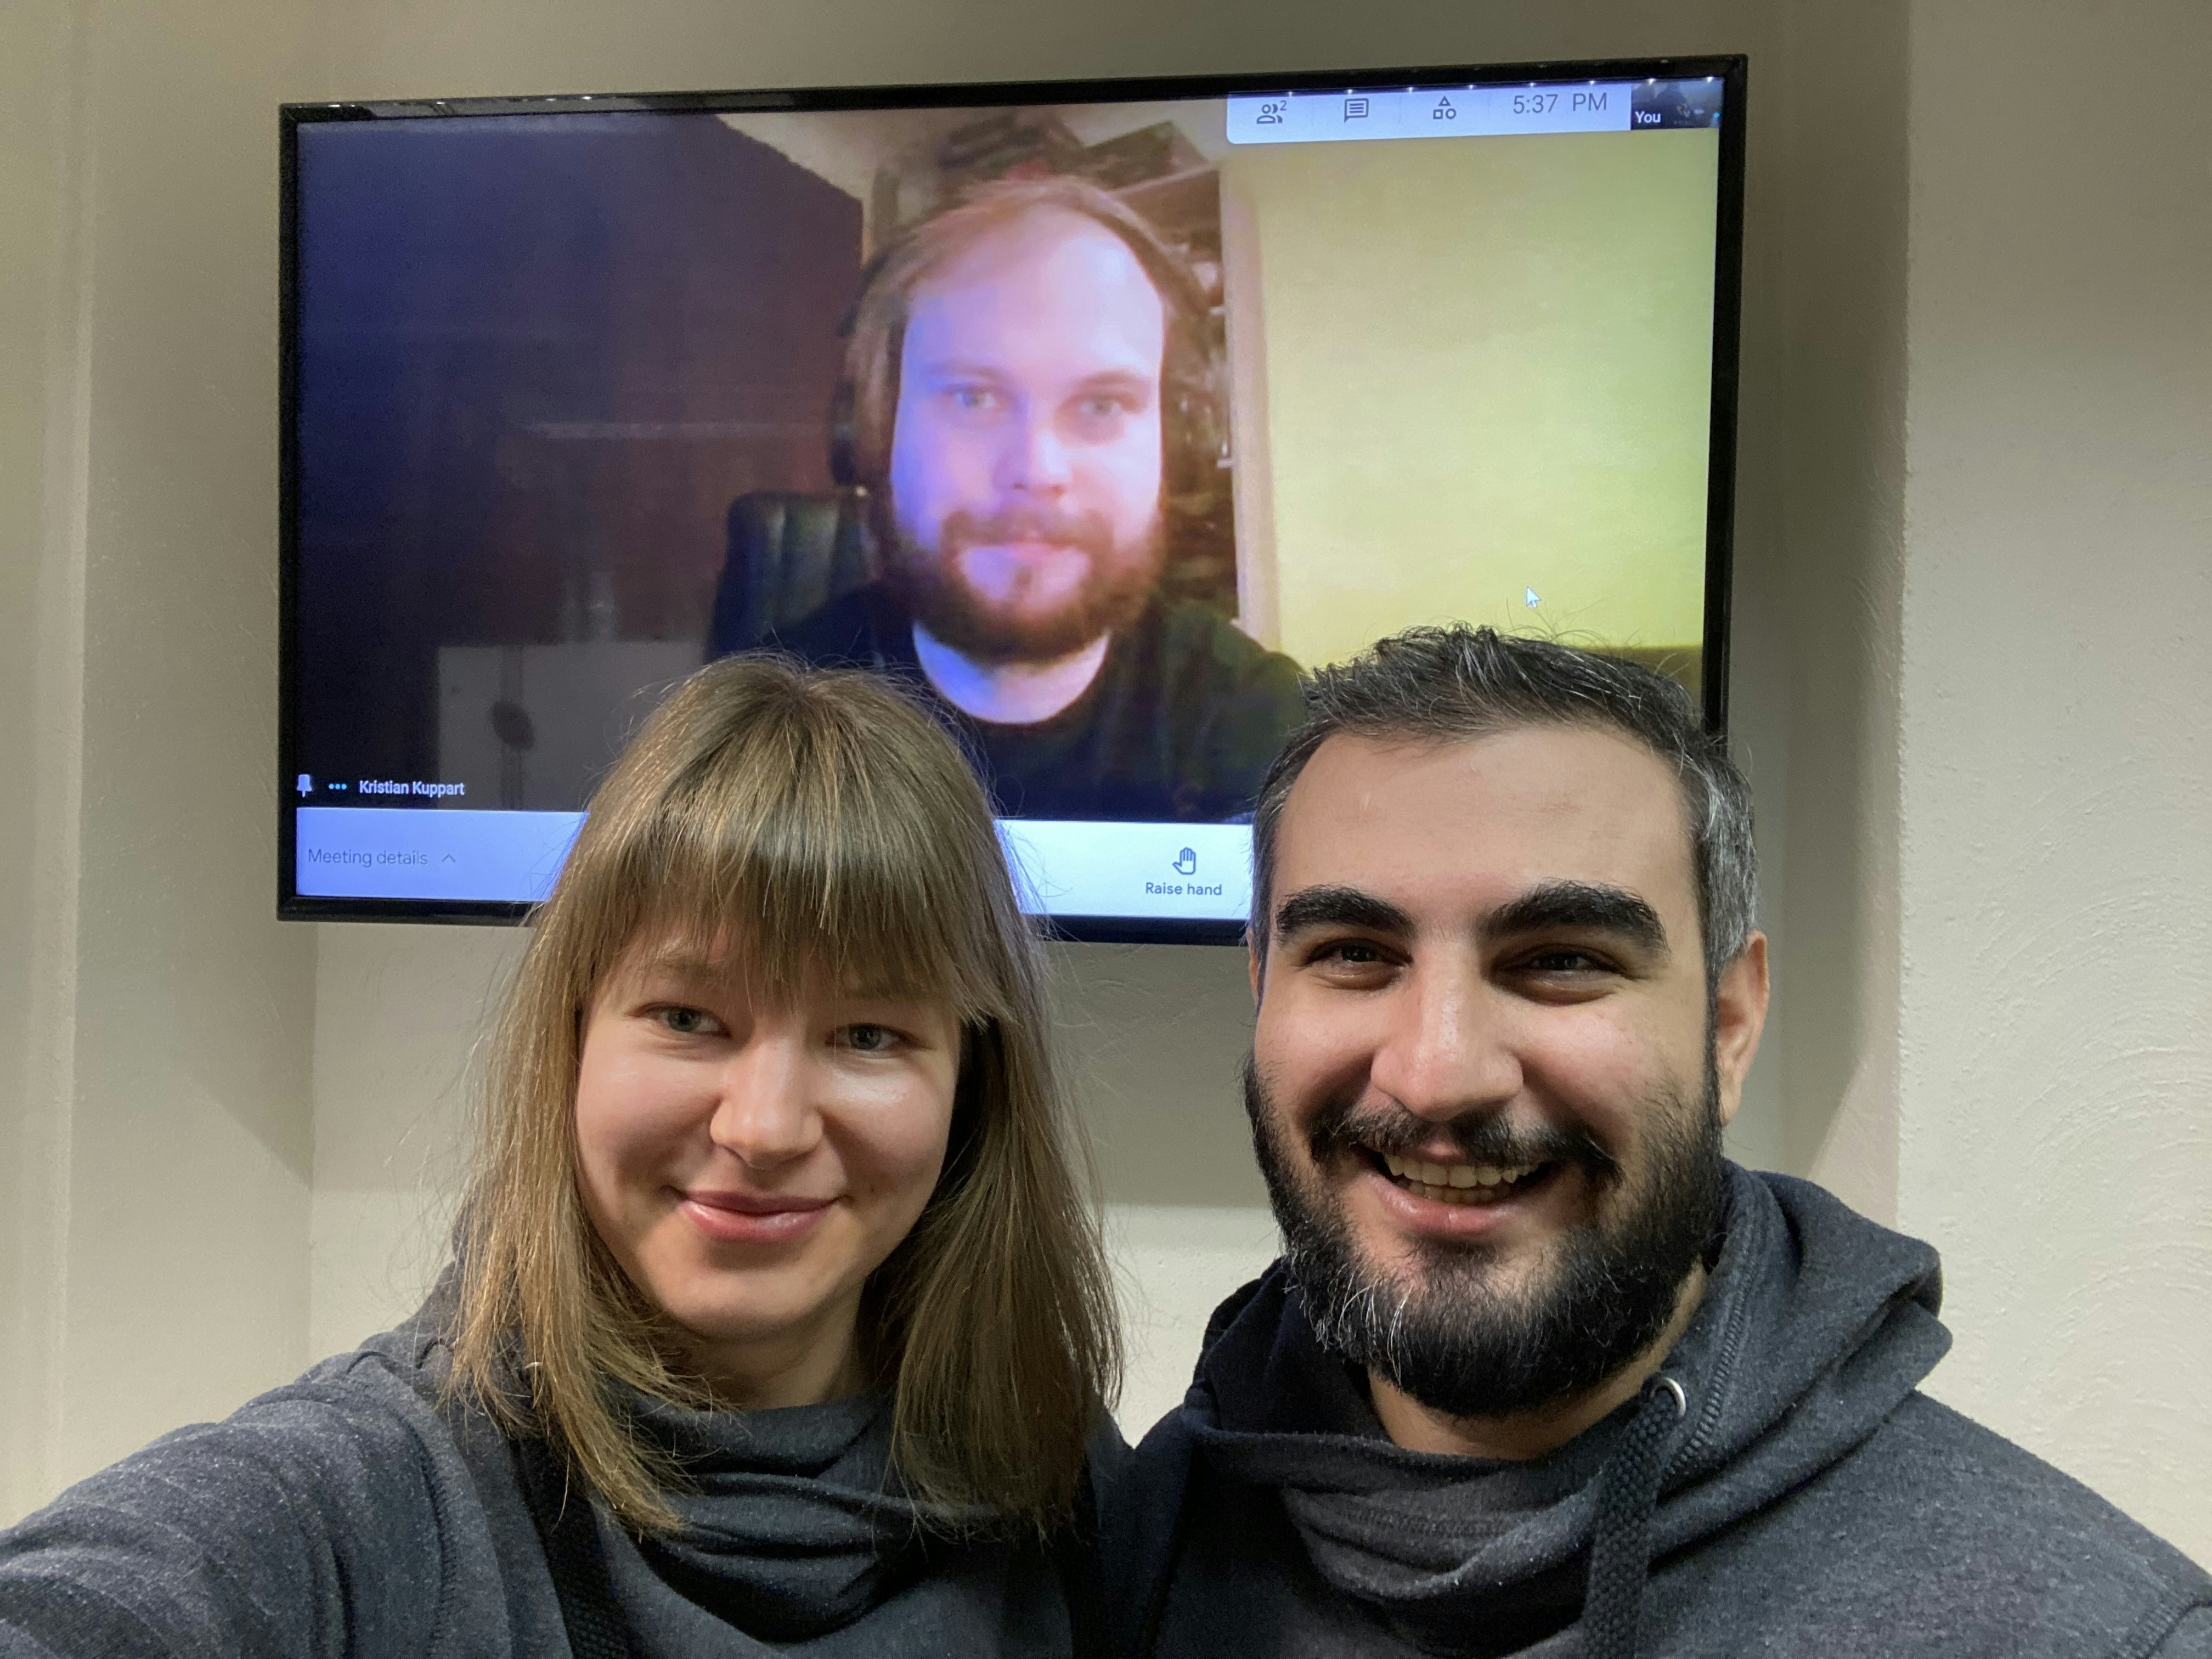 Ana, Ibrahim & Kristjan, who worked together to start creating Face Match